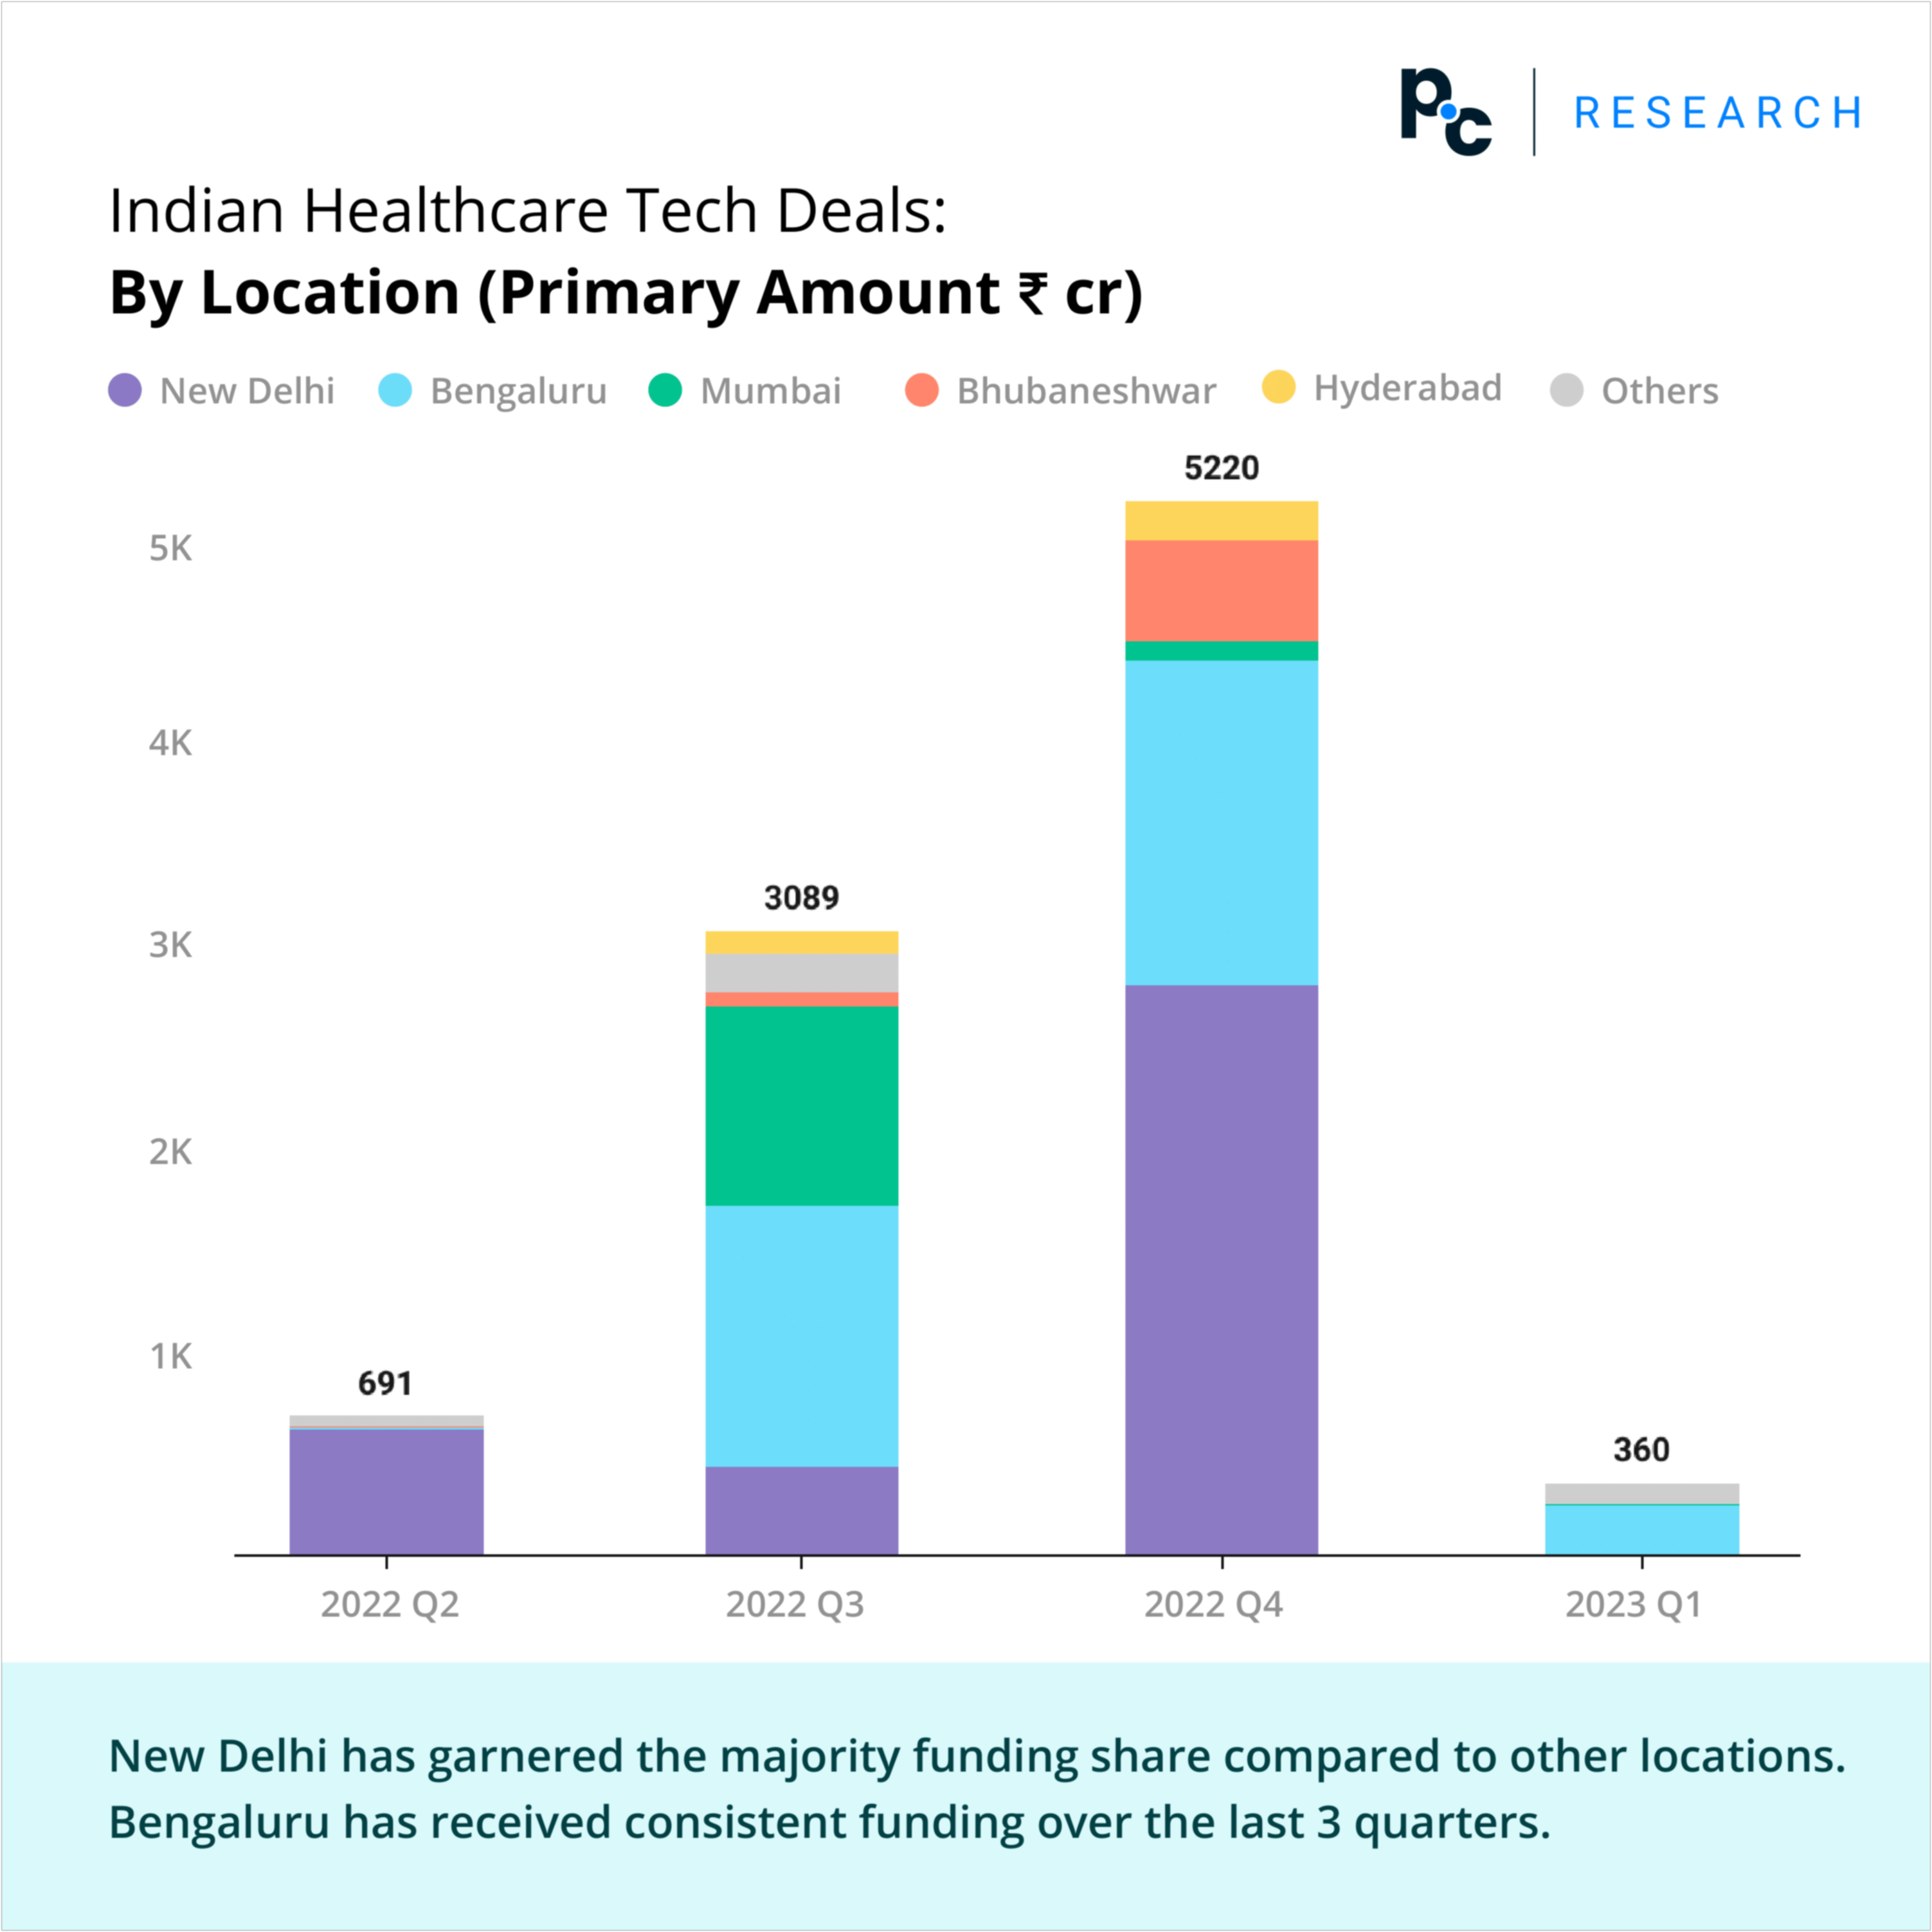 Indian Healthcare Tech Deals: By Location (Primary Amount ₹ cr).

New Delhi has garnered the majority funding share compared to other locations. Bengaluru has received consistent funding over the last 3 quarters. 
